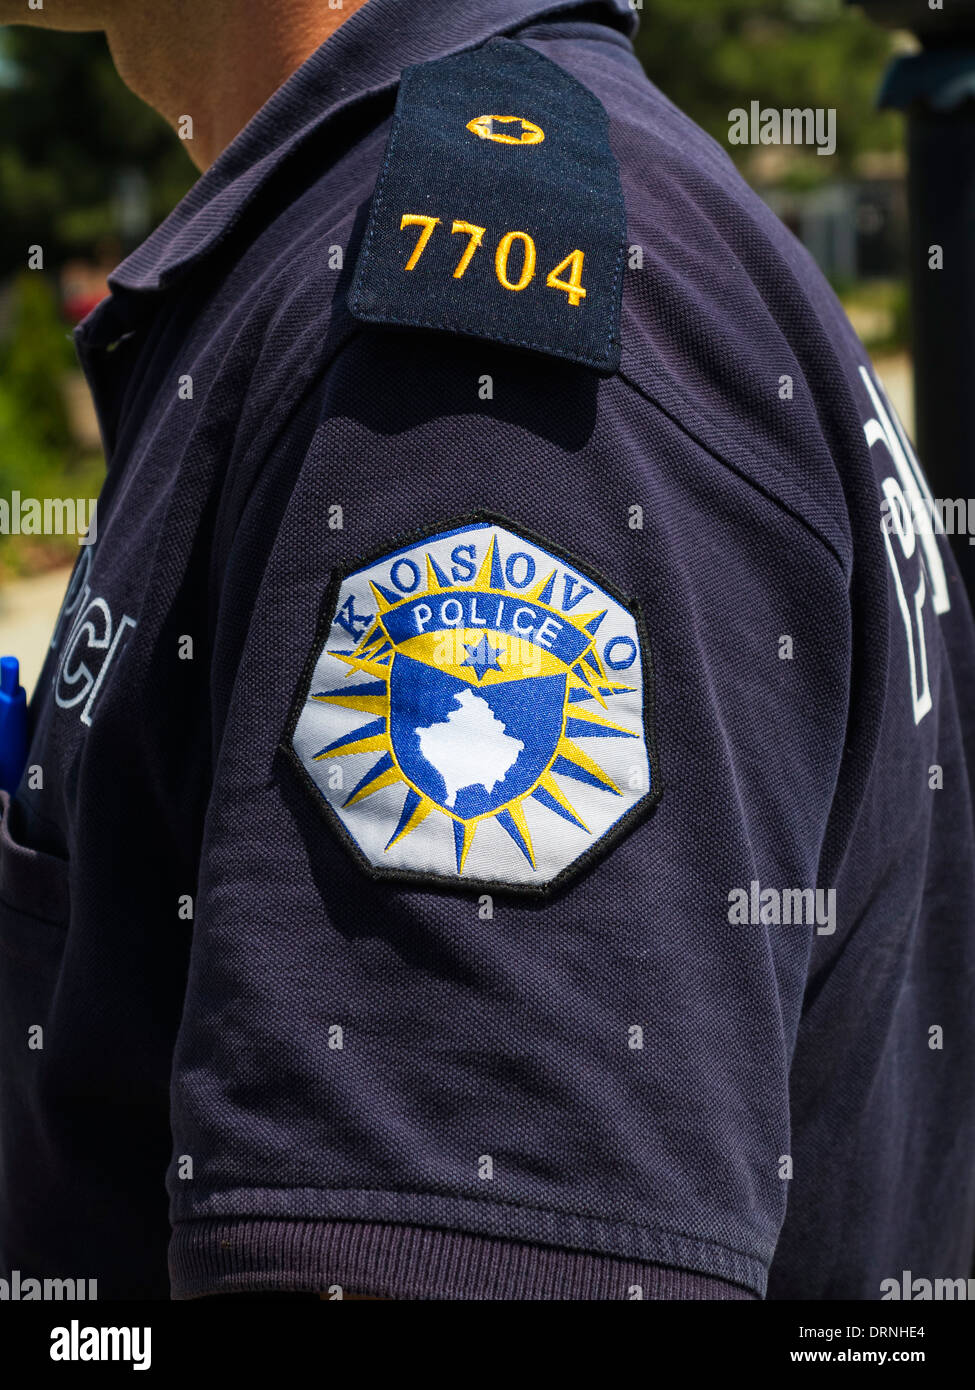 Policeman in Kosovo, Europe showing the emblem of the Kosovo police on his uniform Stock Photo